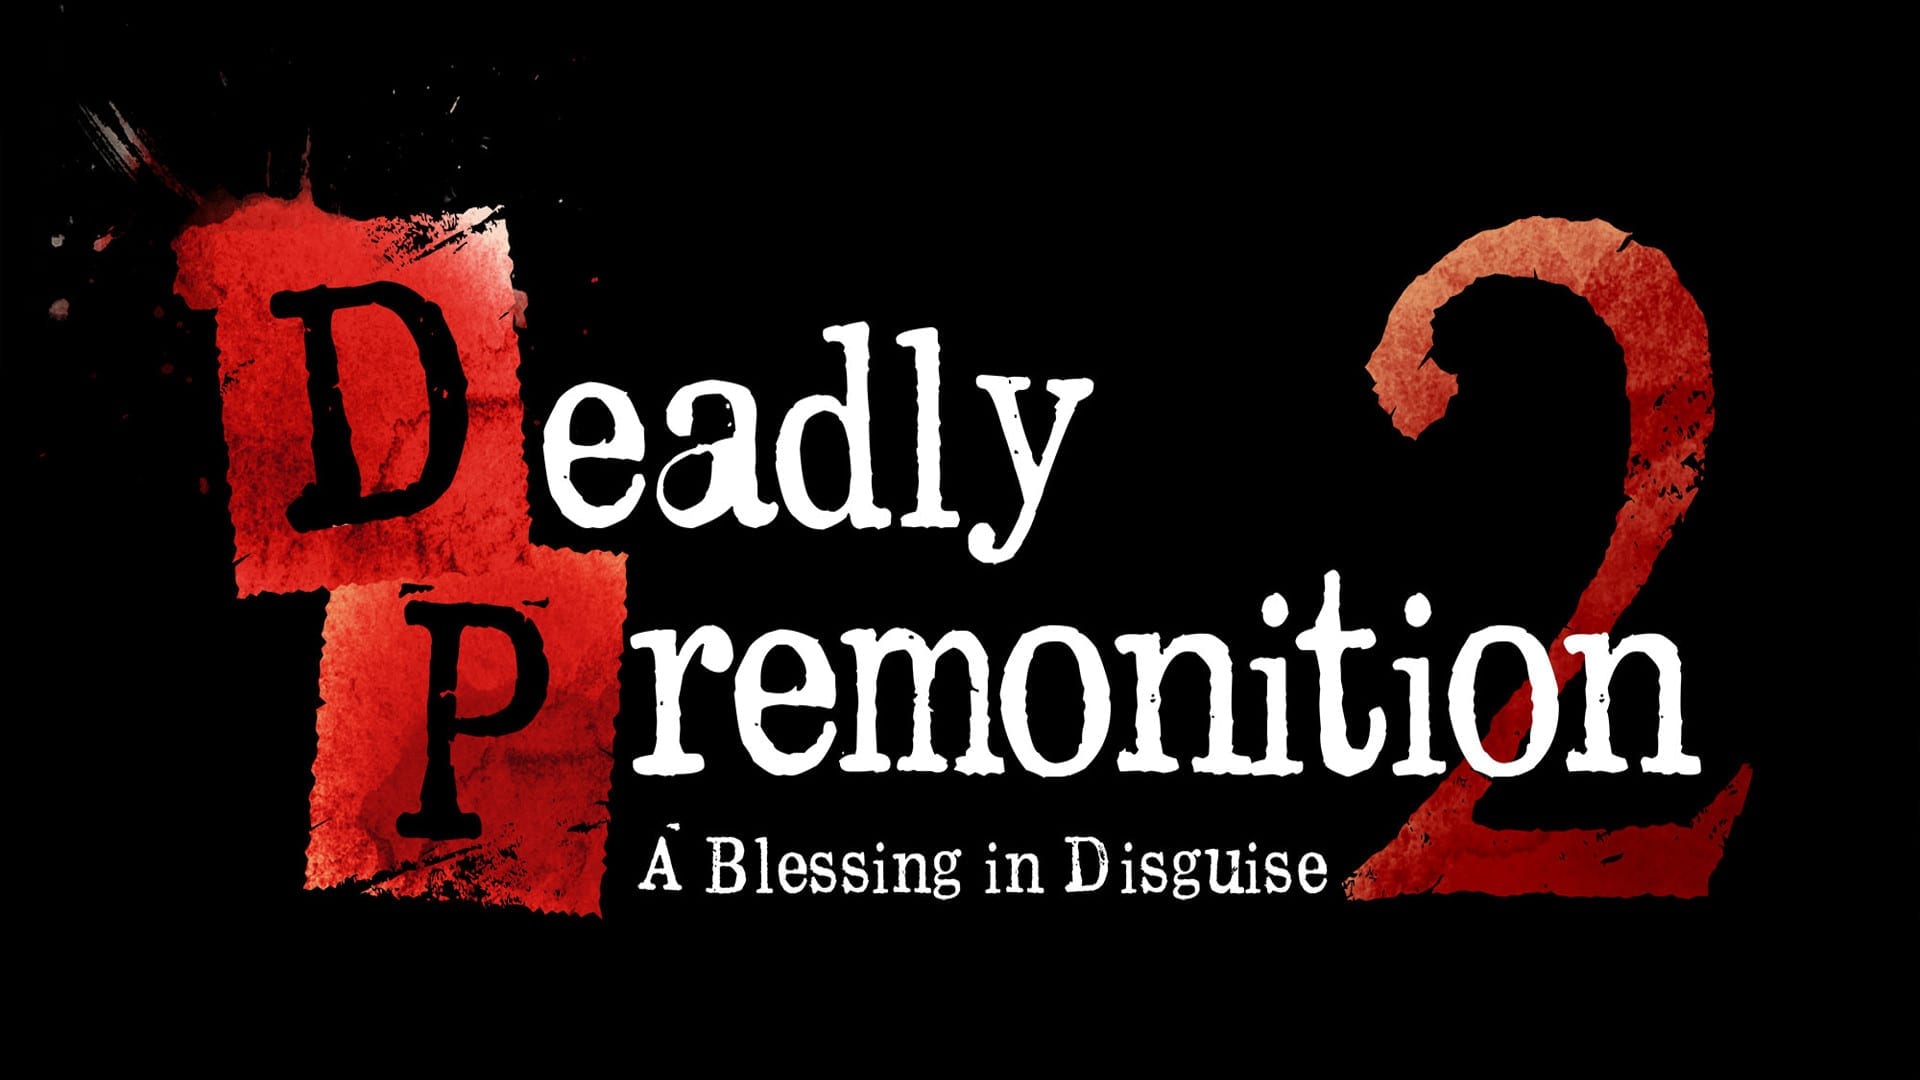 download deadly premonition 2 blessing in disguise